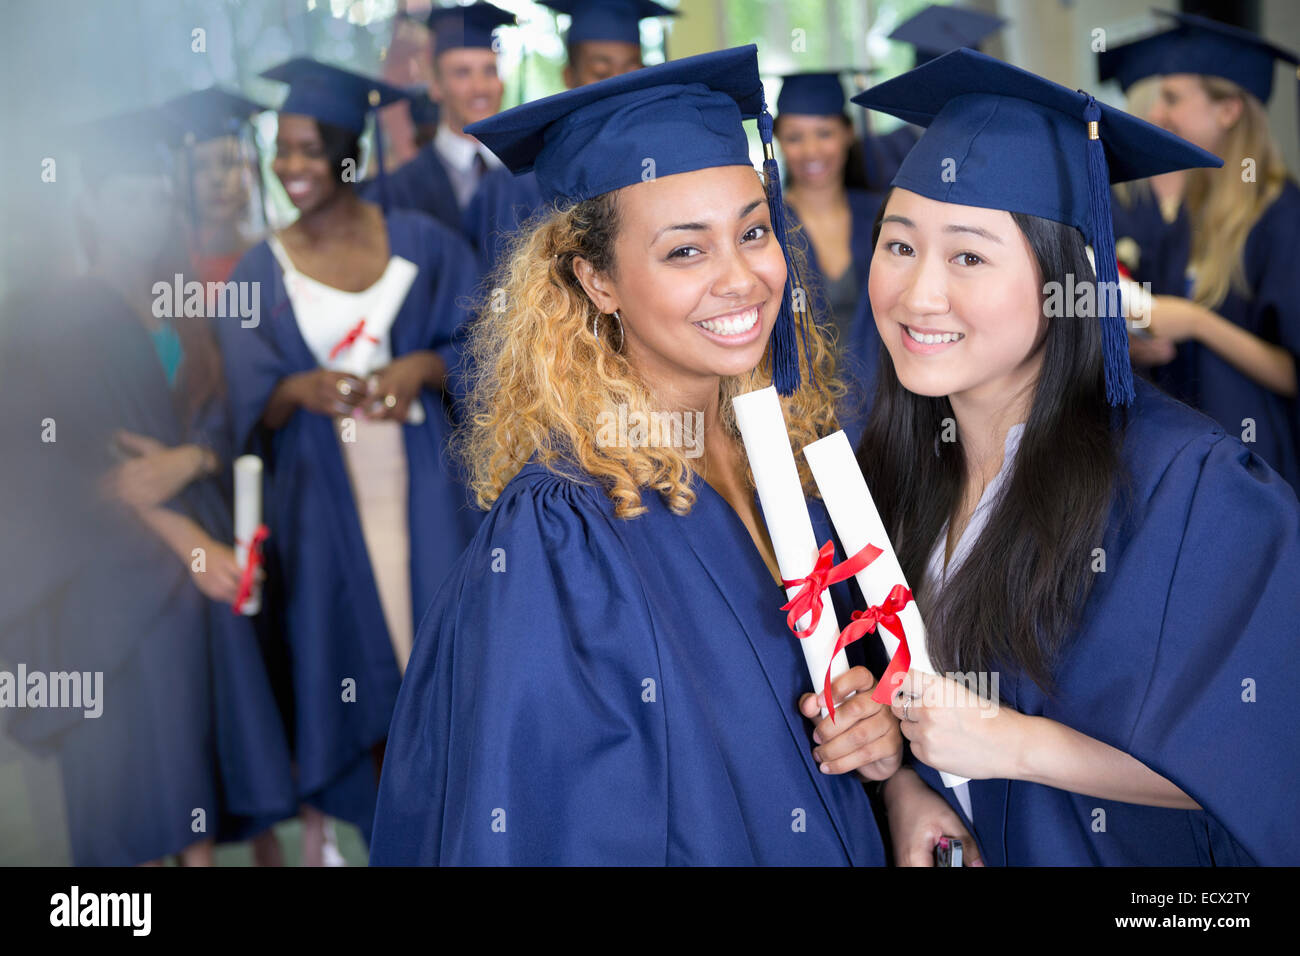 Portrait of smiling students with diplomas standing in corridor Stock Photo